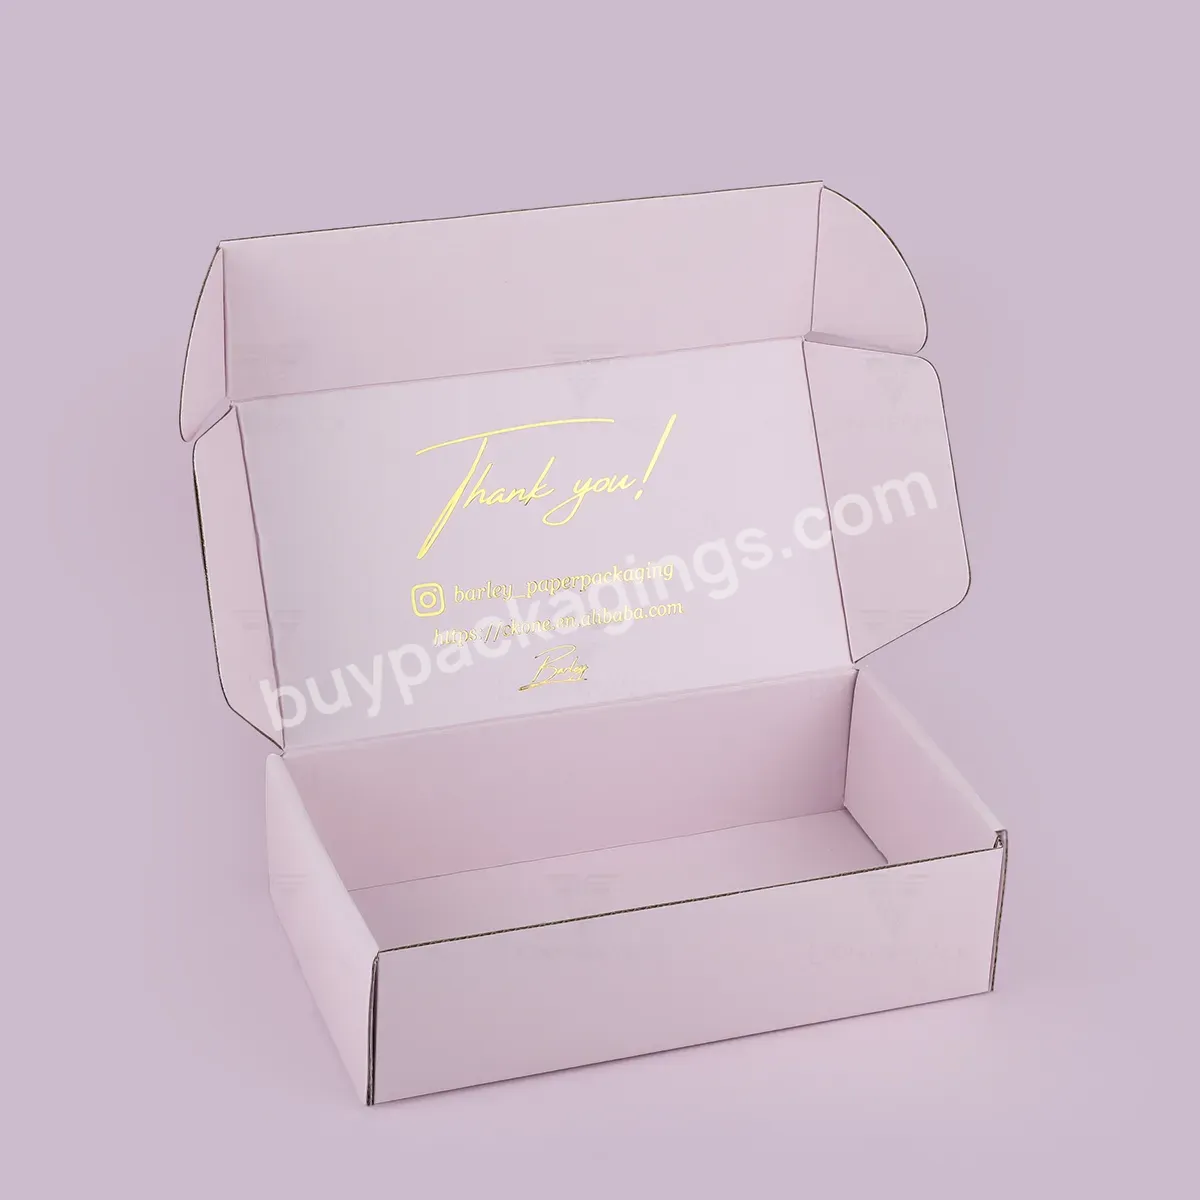 Promotion Corrugated Mailer Shipping Box Packaging Lingerie Clothes Cosmetics Lingerie Clothes Cosmetics With Custom Logo - Buy Lingerie Box,Shipping Box,Mailer Boxes.